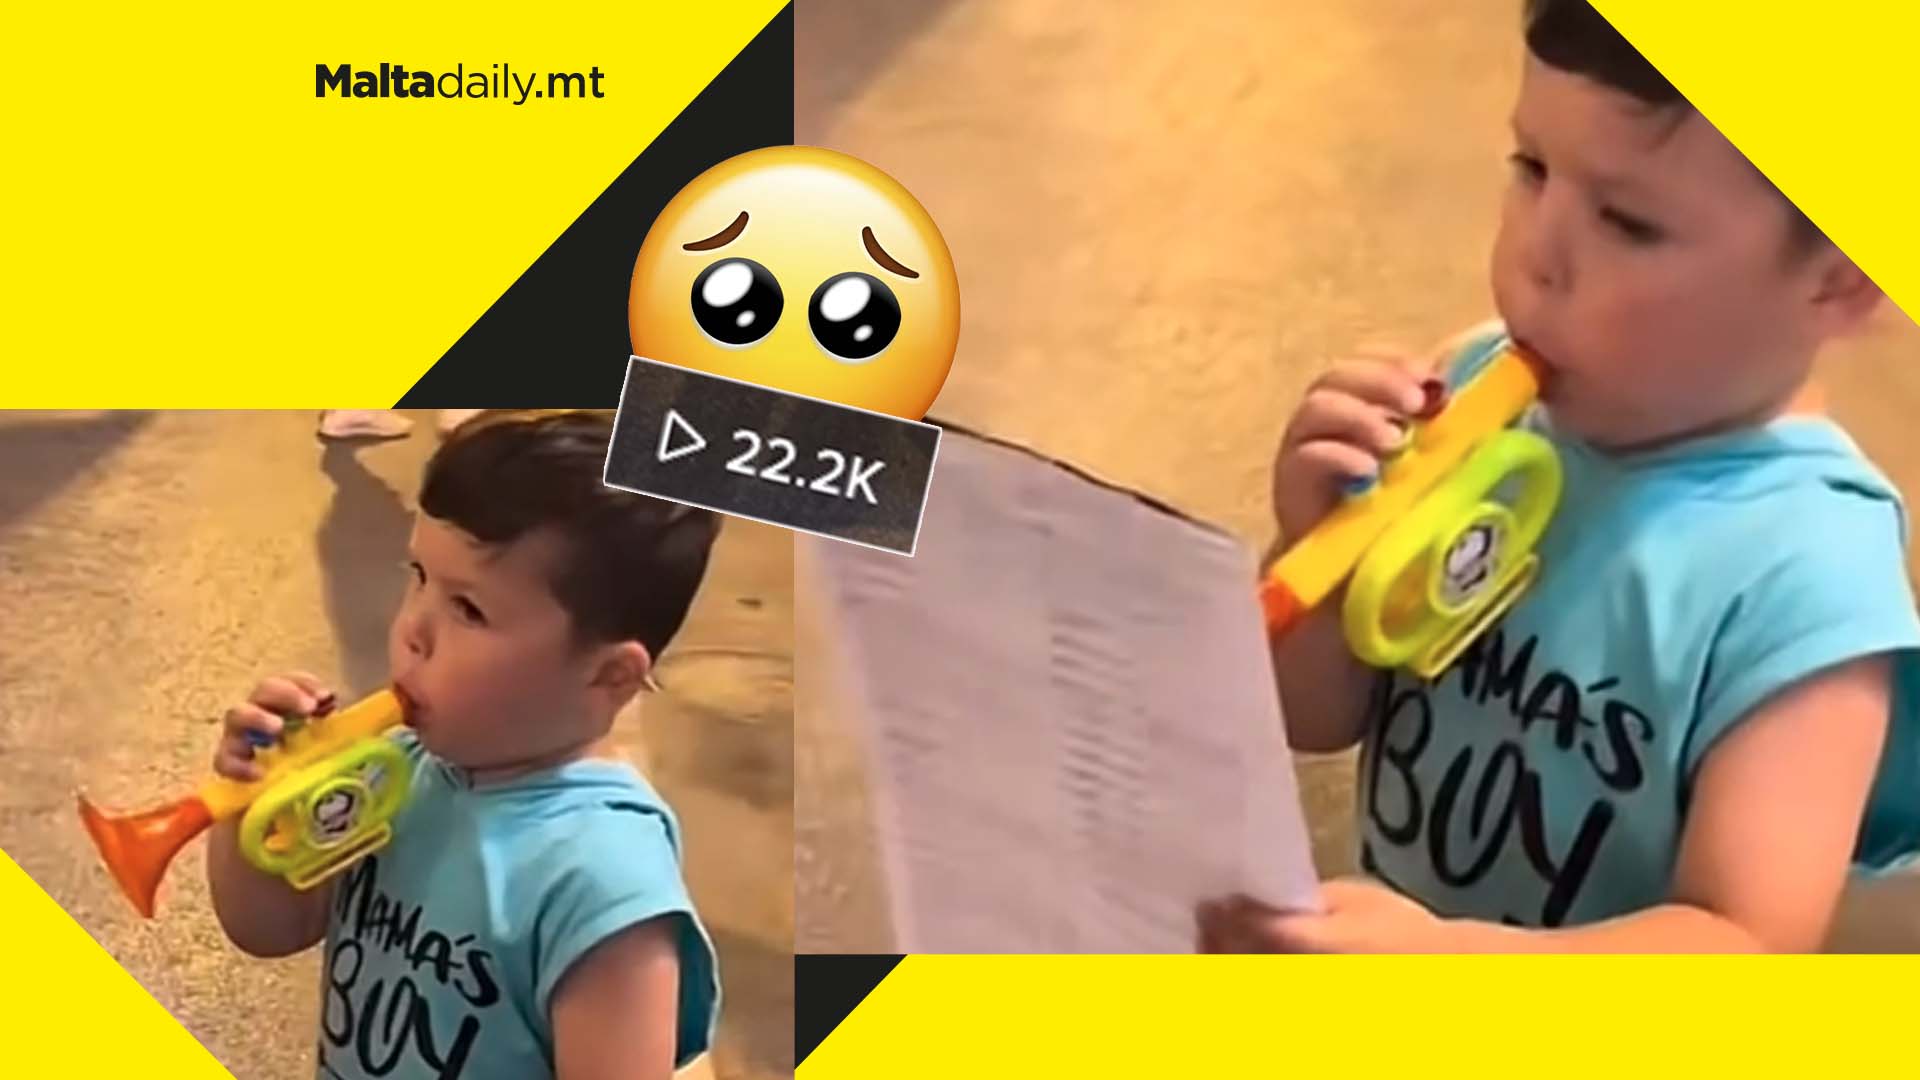 Adorable Maltese boy imitates band club musicians with toy trumpet